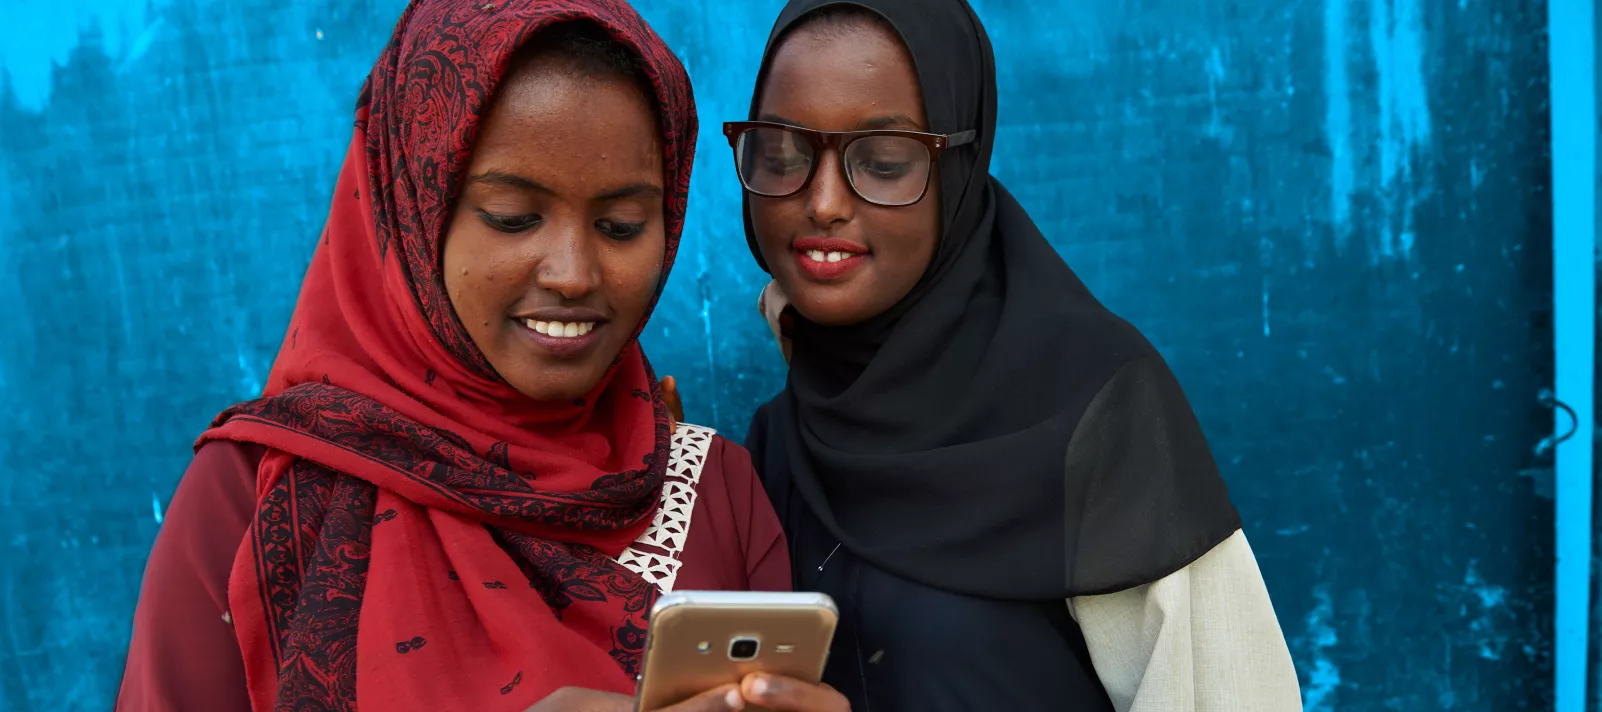 two adolescent girls looking at a mobile phone screen